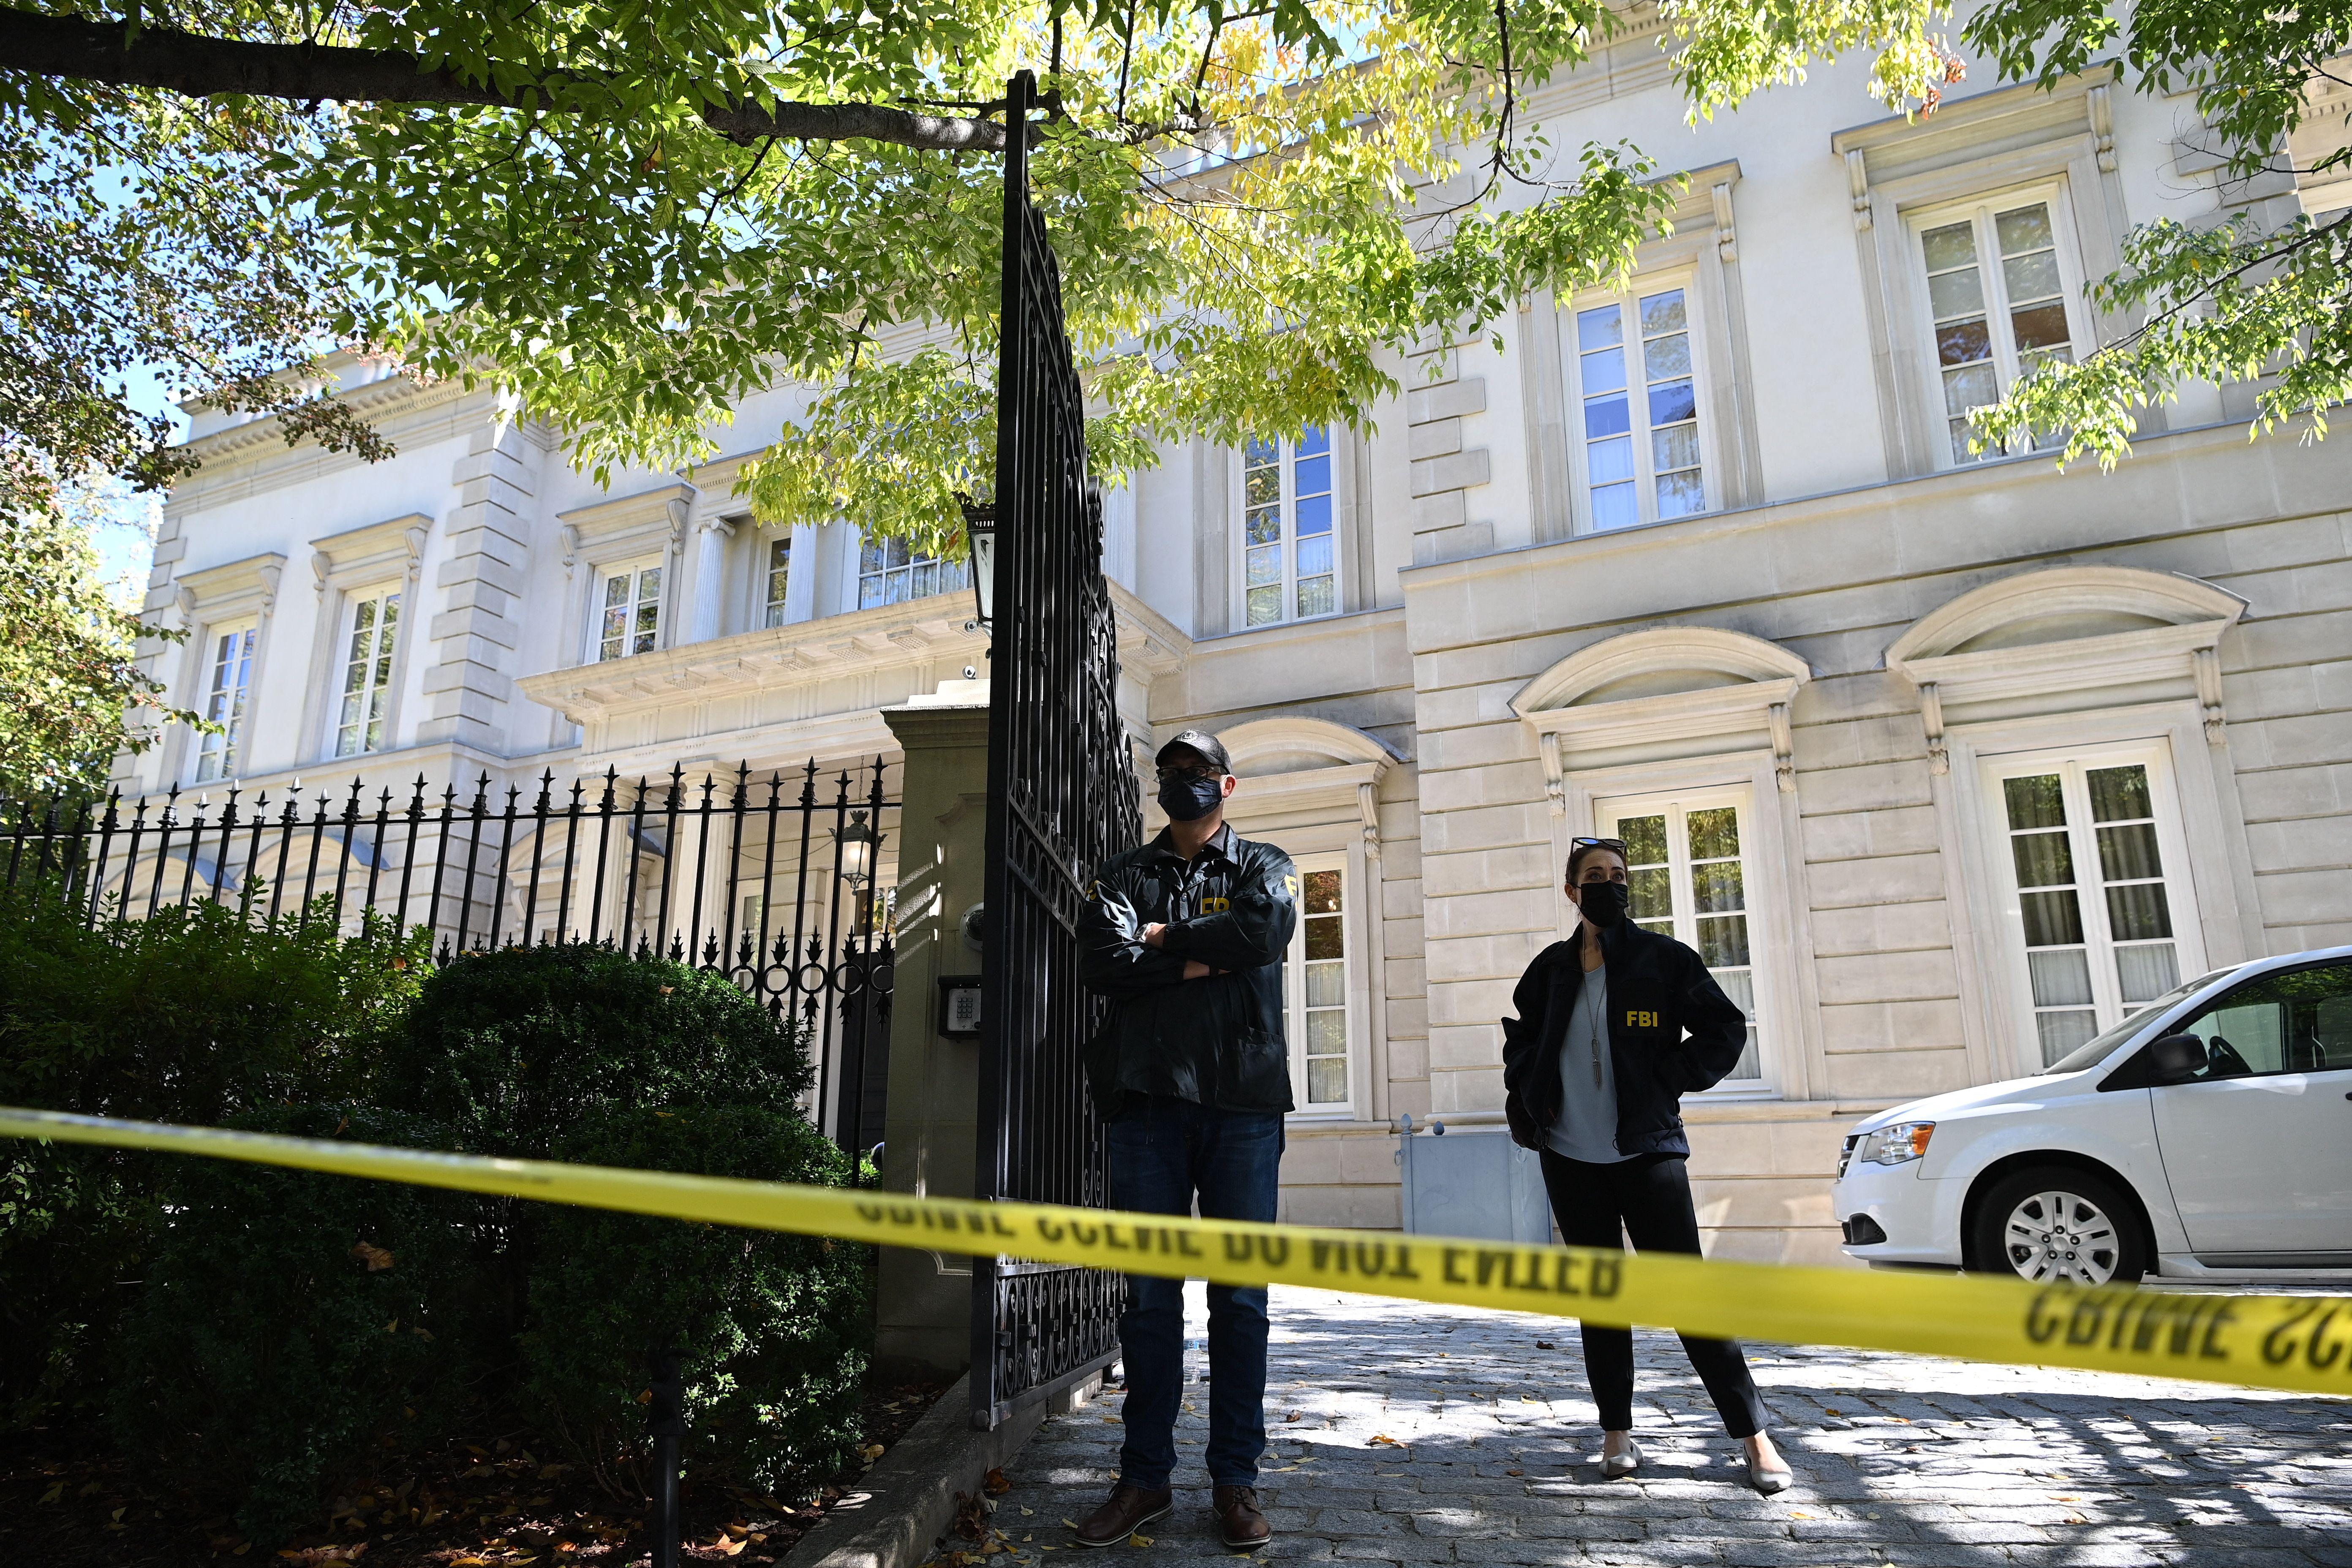 Agents wearing FBI jackets stand guard in front of a mansion closed off with crime scene tape